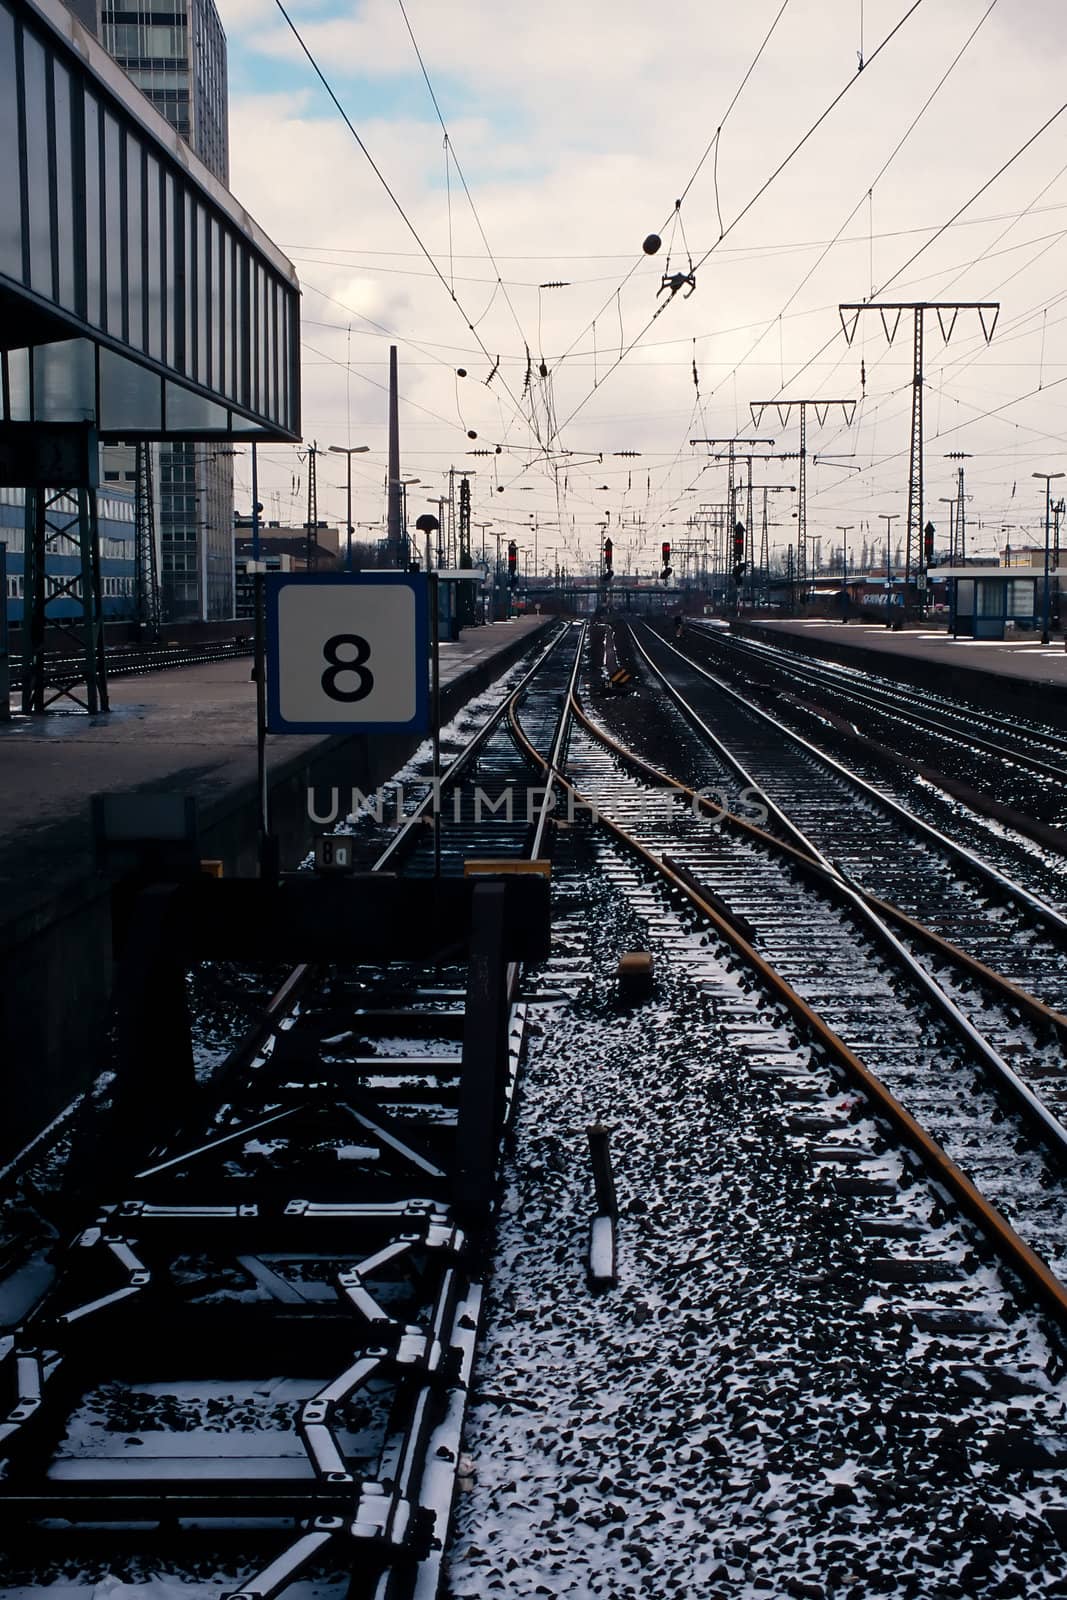 Railway tracks passing a station by PiLens